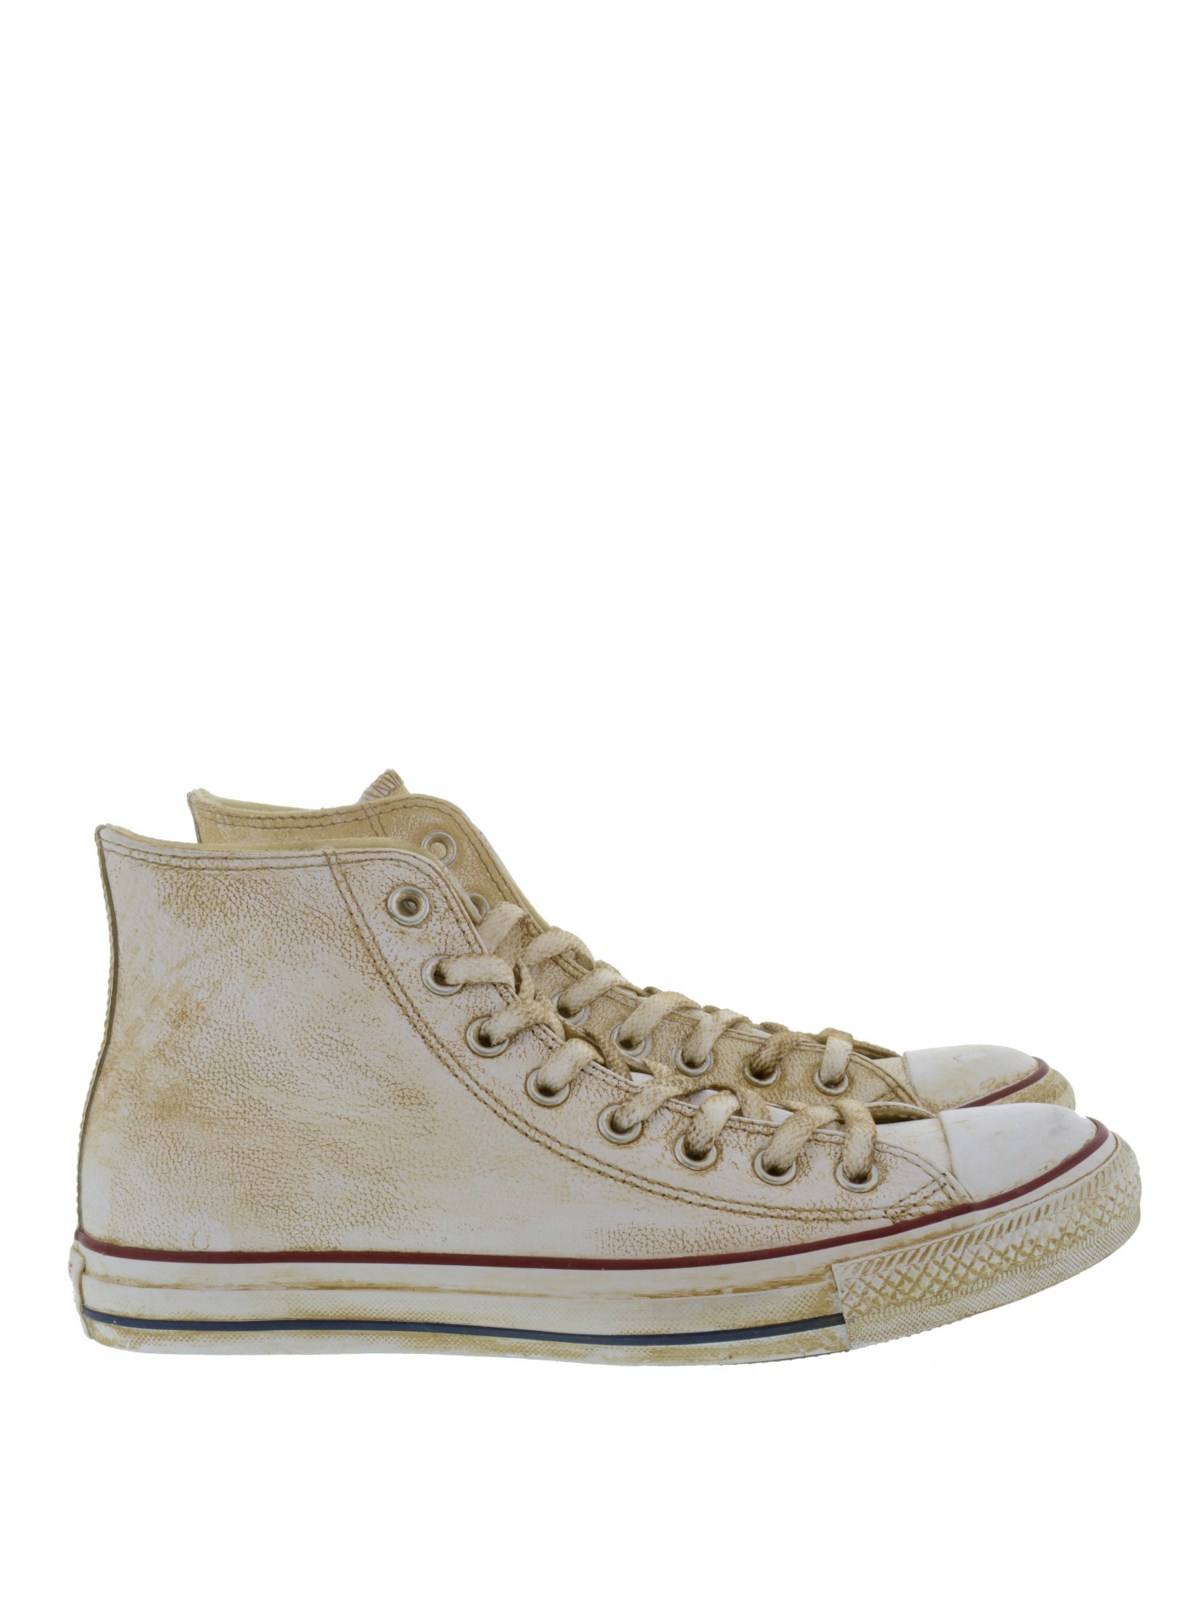 at opfinde nul Margaret Mitchell Trainers Converse Limited Edition - Limited Edition sneakers -  1C14FA30WHITEGOLD